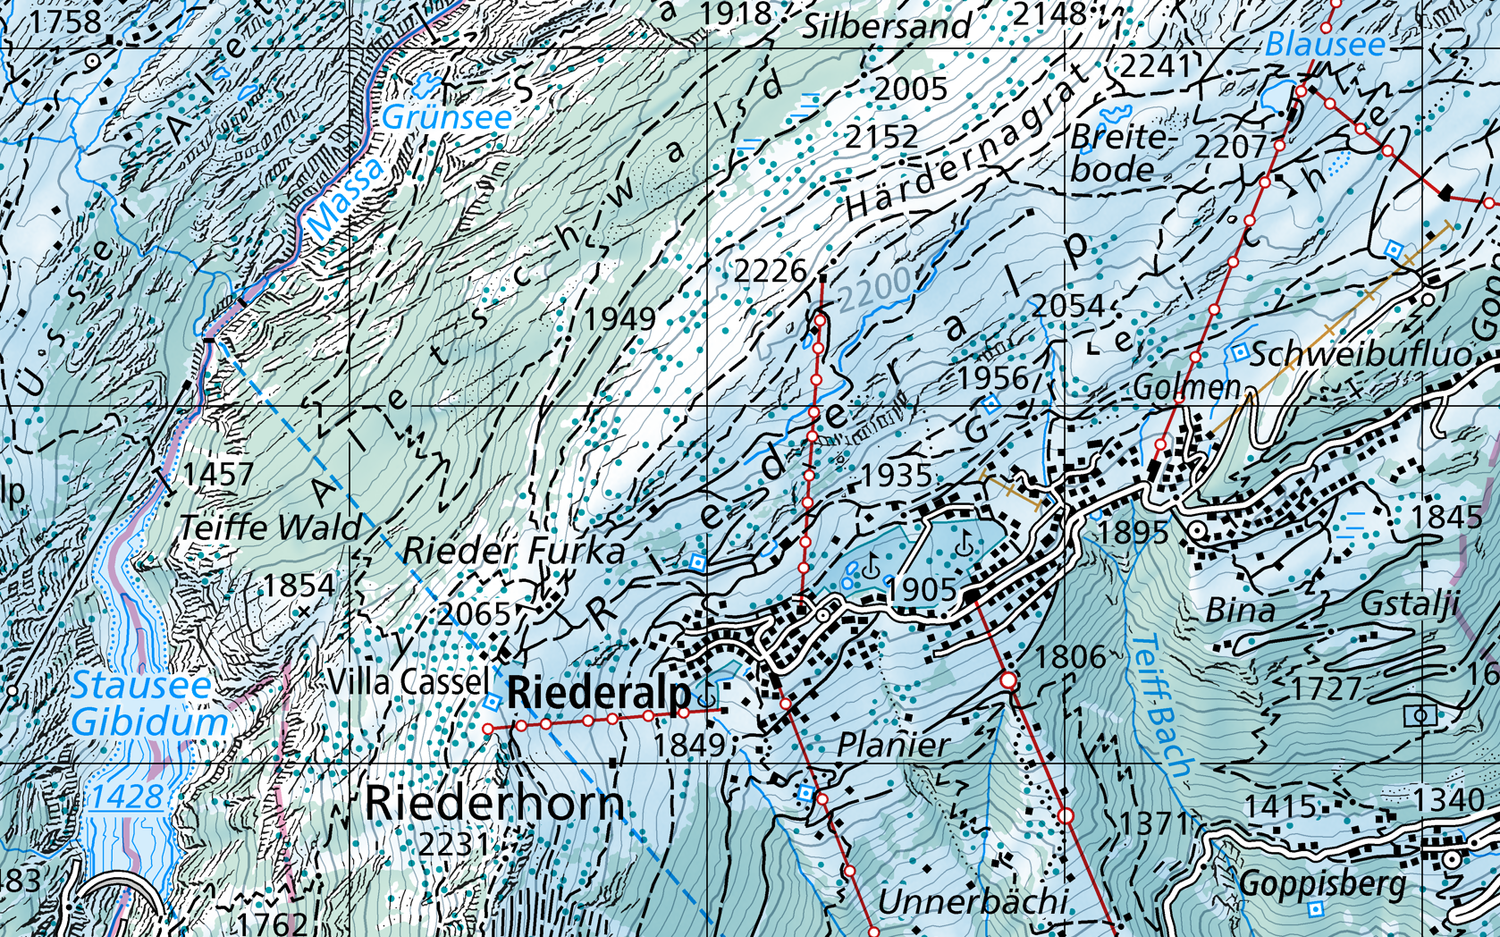 The picture shows a section of a map of Riederalp and the surrounding area in winter colours.